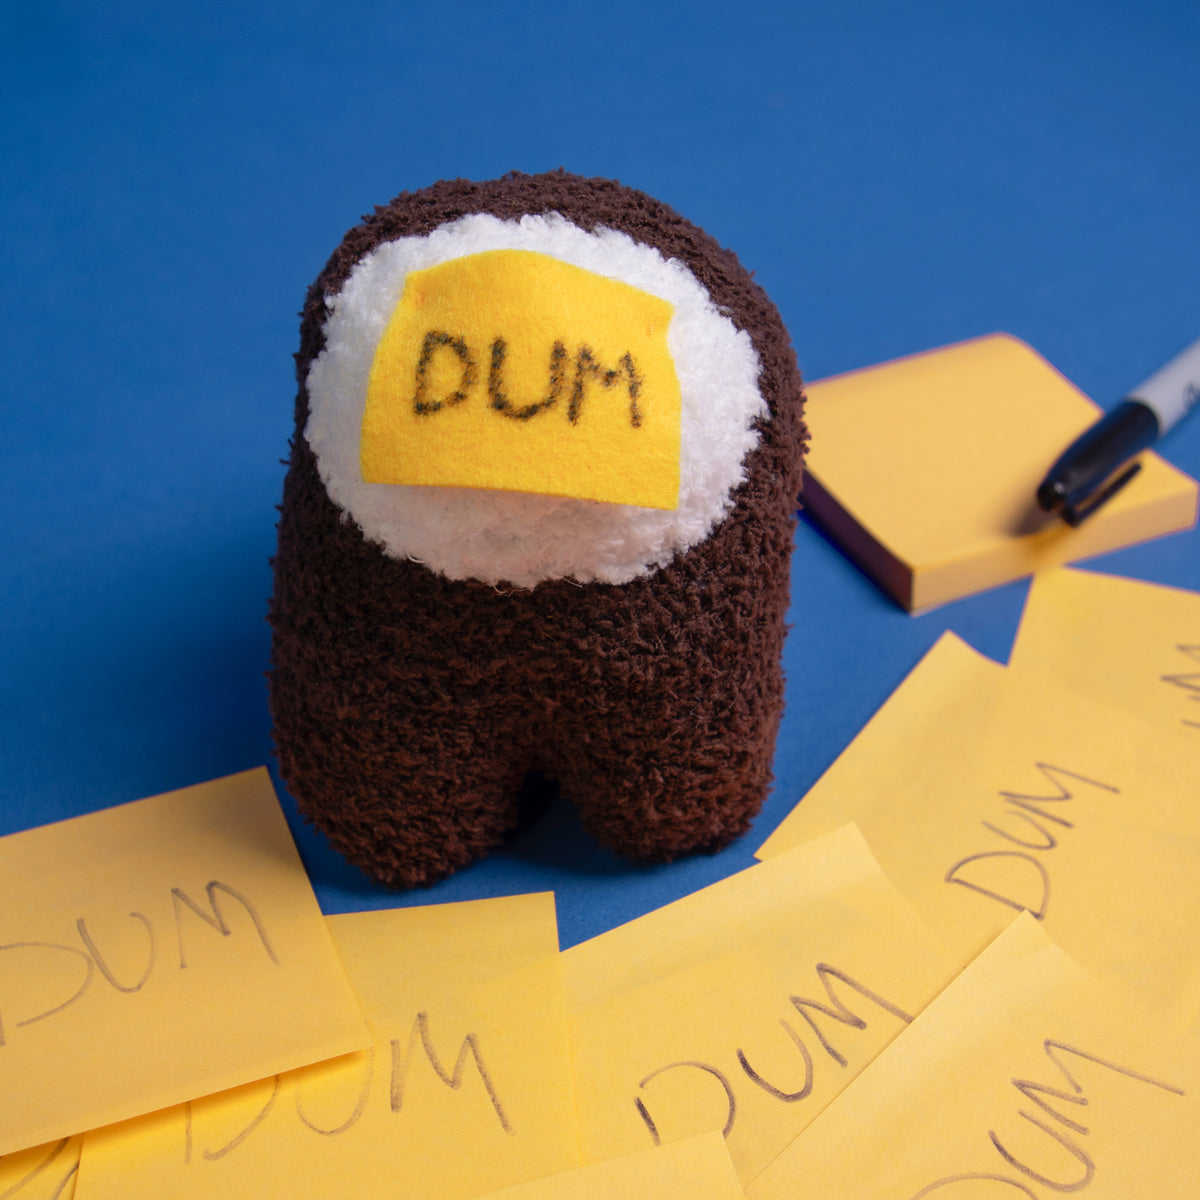 A zoomed in close up of the DUM brown Crewmate, to the upper right side is a yellow sticky notepad with a permanent marker resting on it. In front of the Crewmate, there are several layered yellow sticky notes that all have DUM written on them